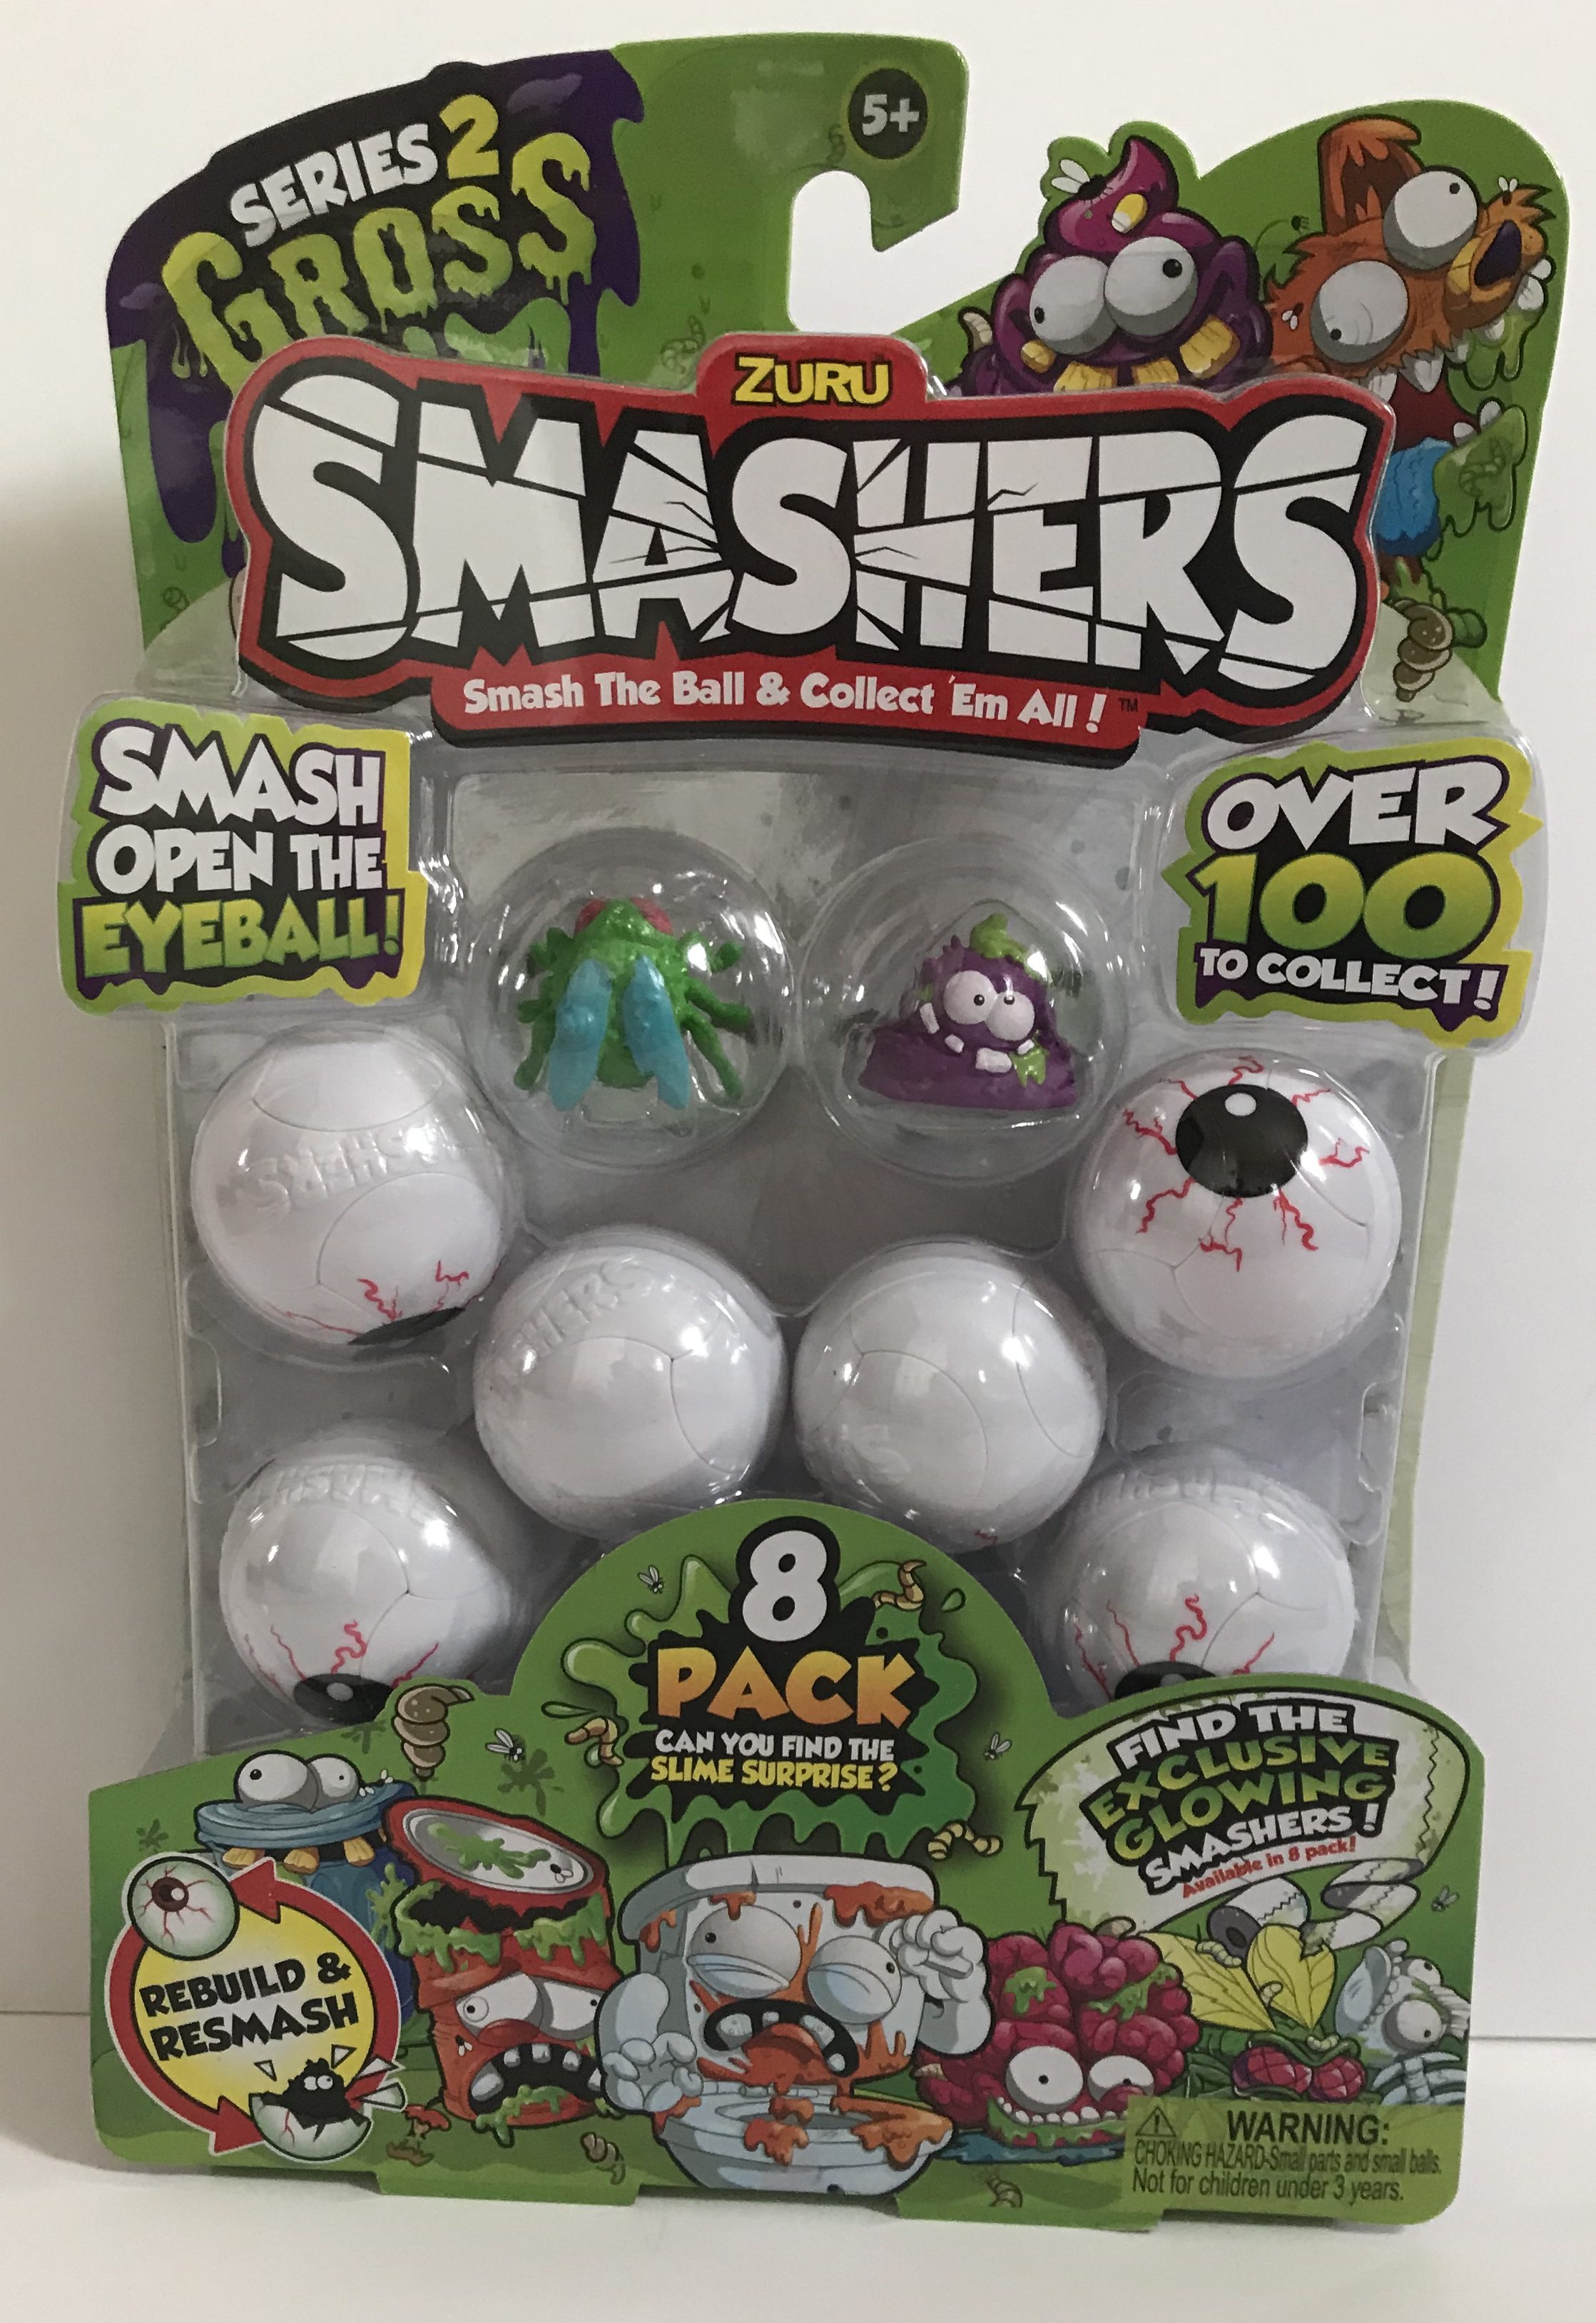 Have A Happy Halloween With The Latest Zuru Smashers Gross Series 2 Sludge Bus & Smashers Packs